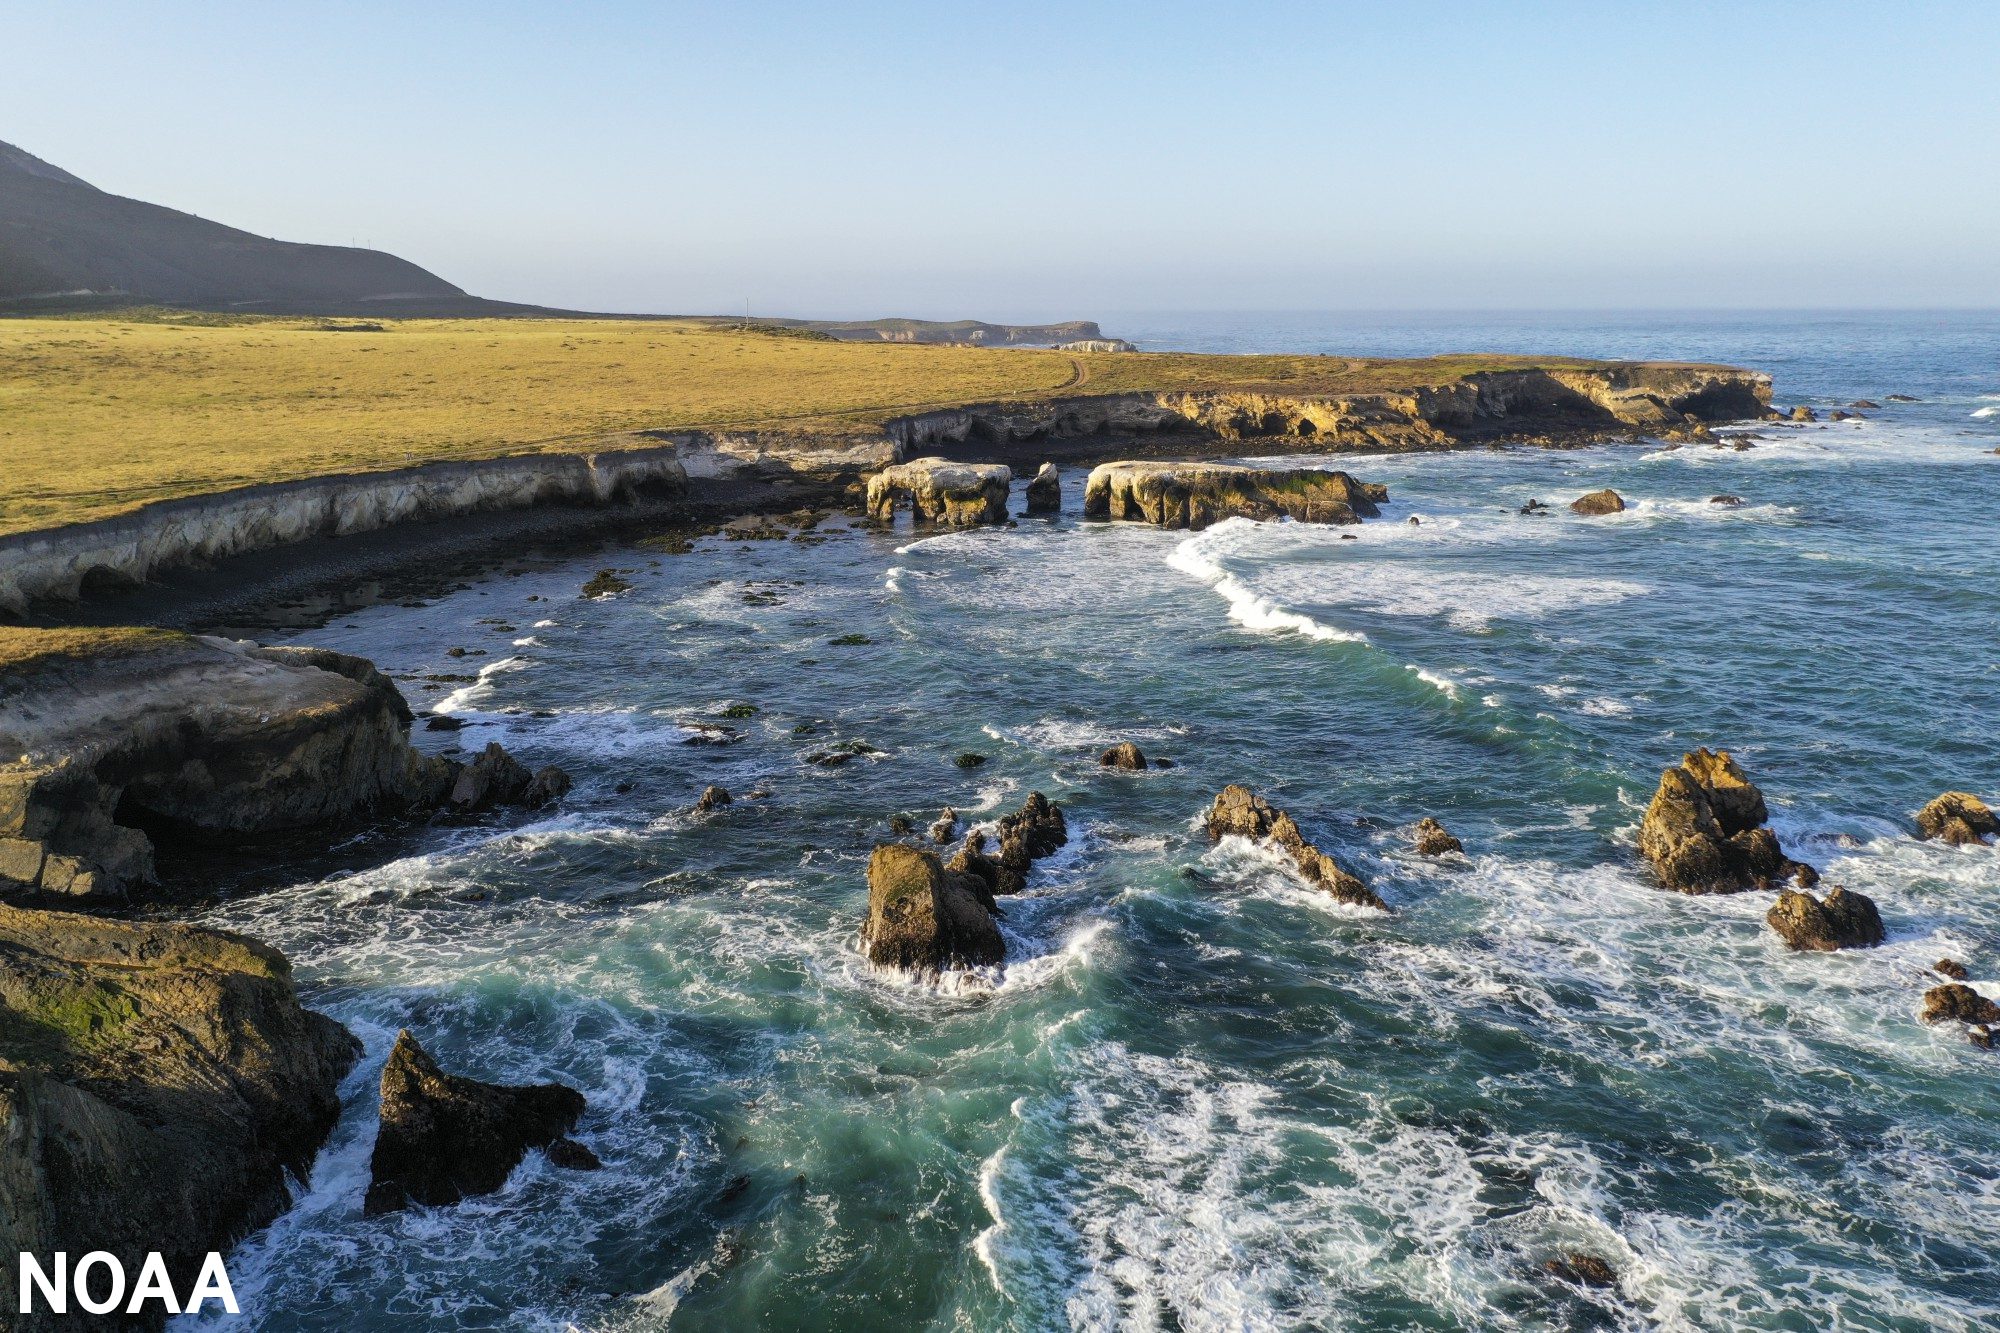 A view of the proposed Chumash Heritage National Marine Sanctuary near Montana de Oro State Park in San Luis Obispo County, California. (Image credit: Robert Schwemmer/NOA